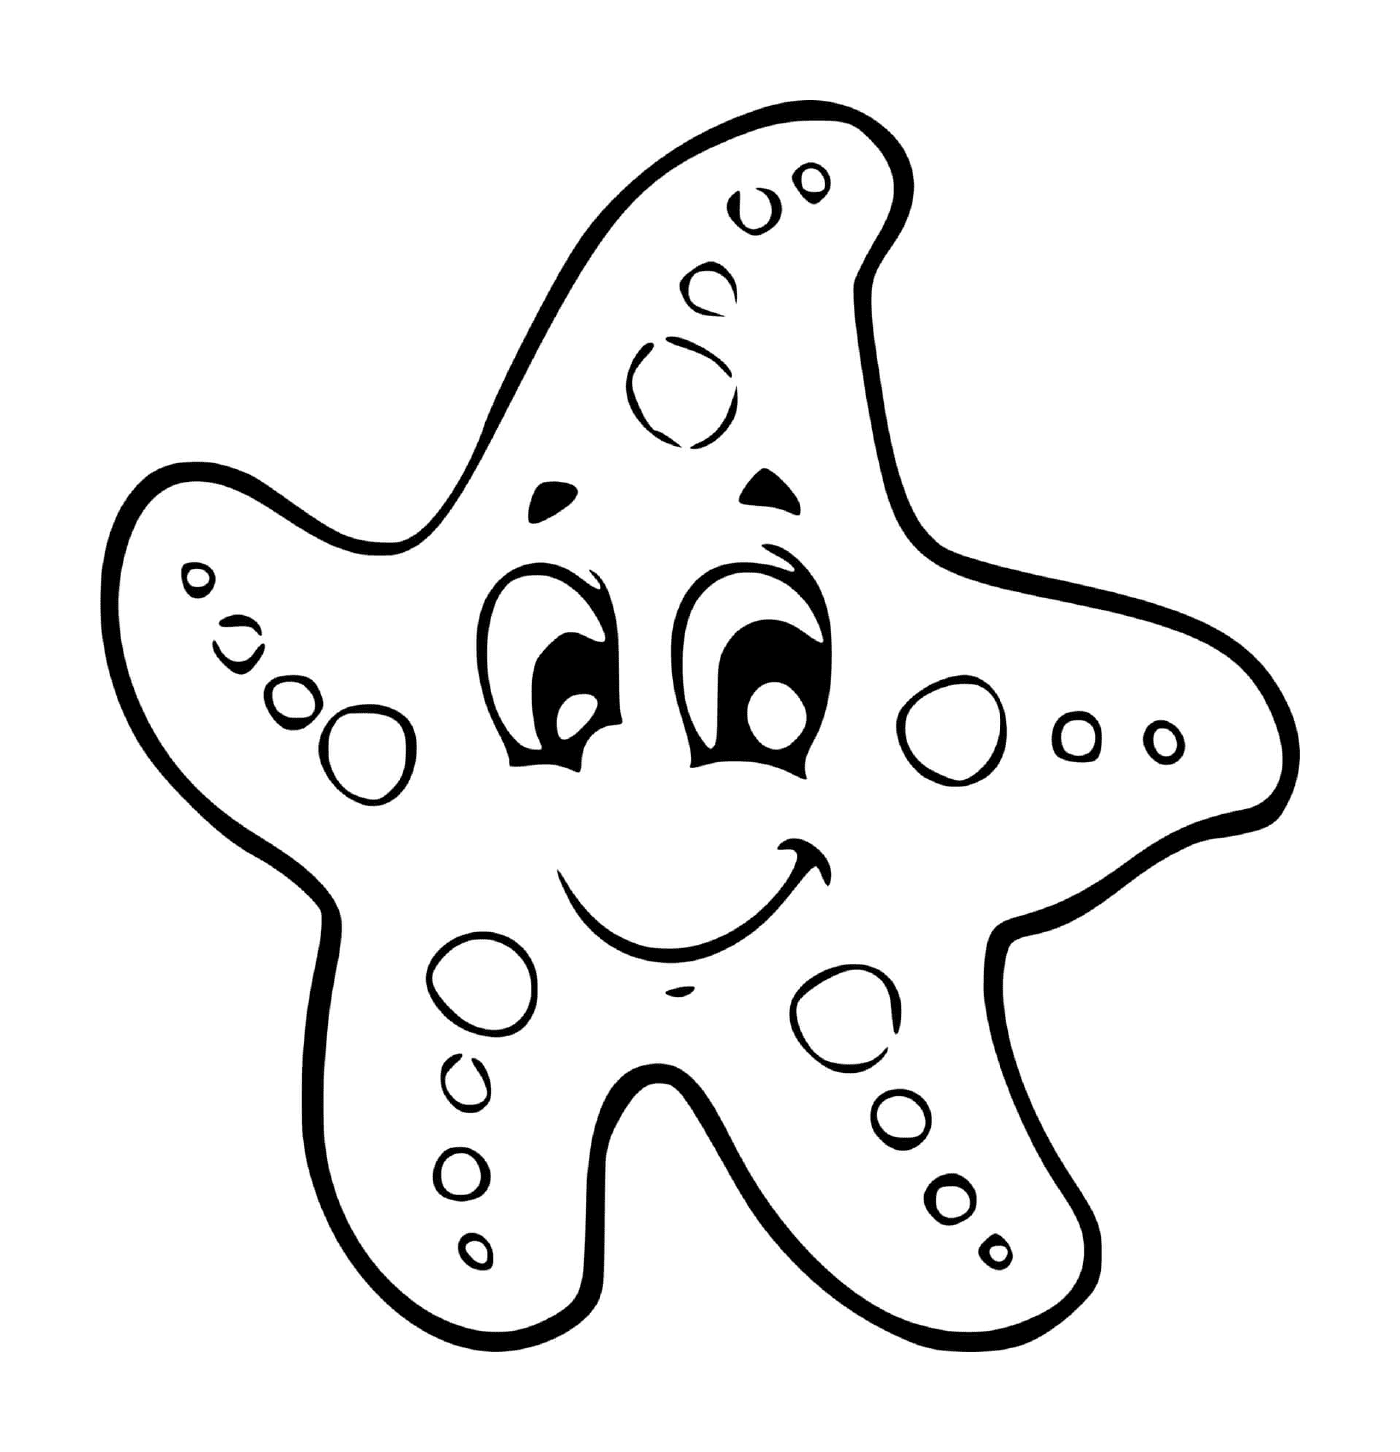  A star of the sea for children in large maternal section 